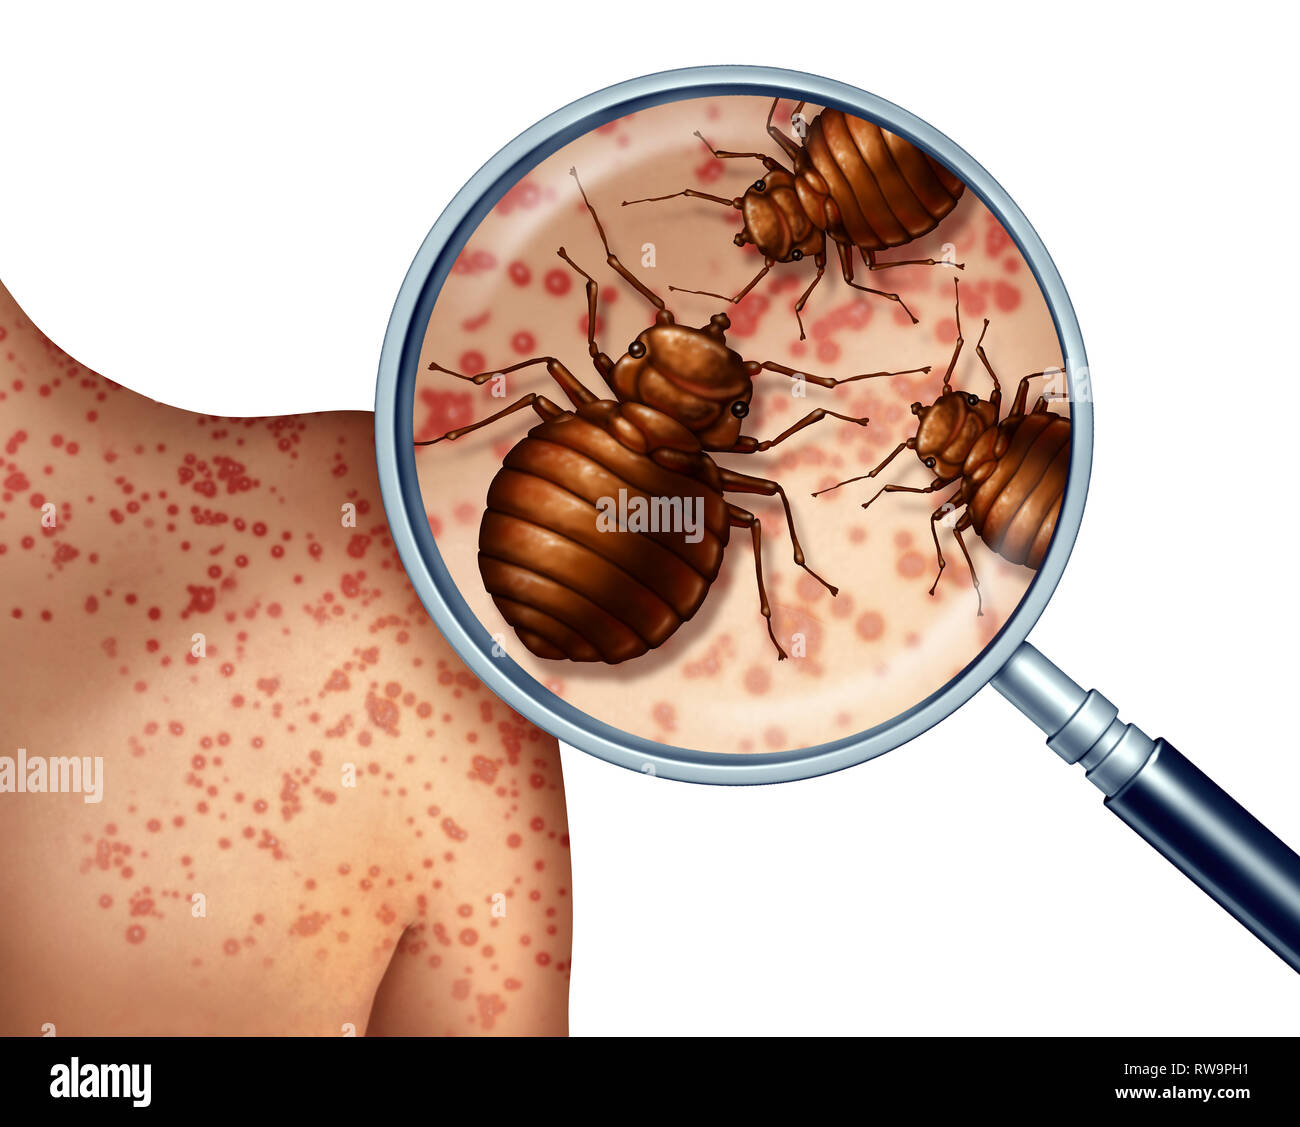 Bed bug bites on human skin  or bedbug infestation concept as a magnification close up of  parasitic insect pests as a hygiene symbol and health. Stock Photo